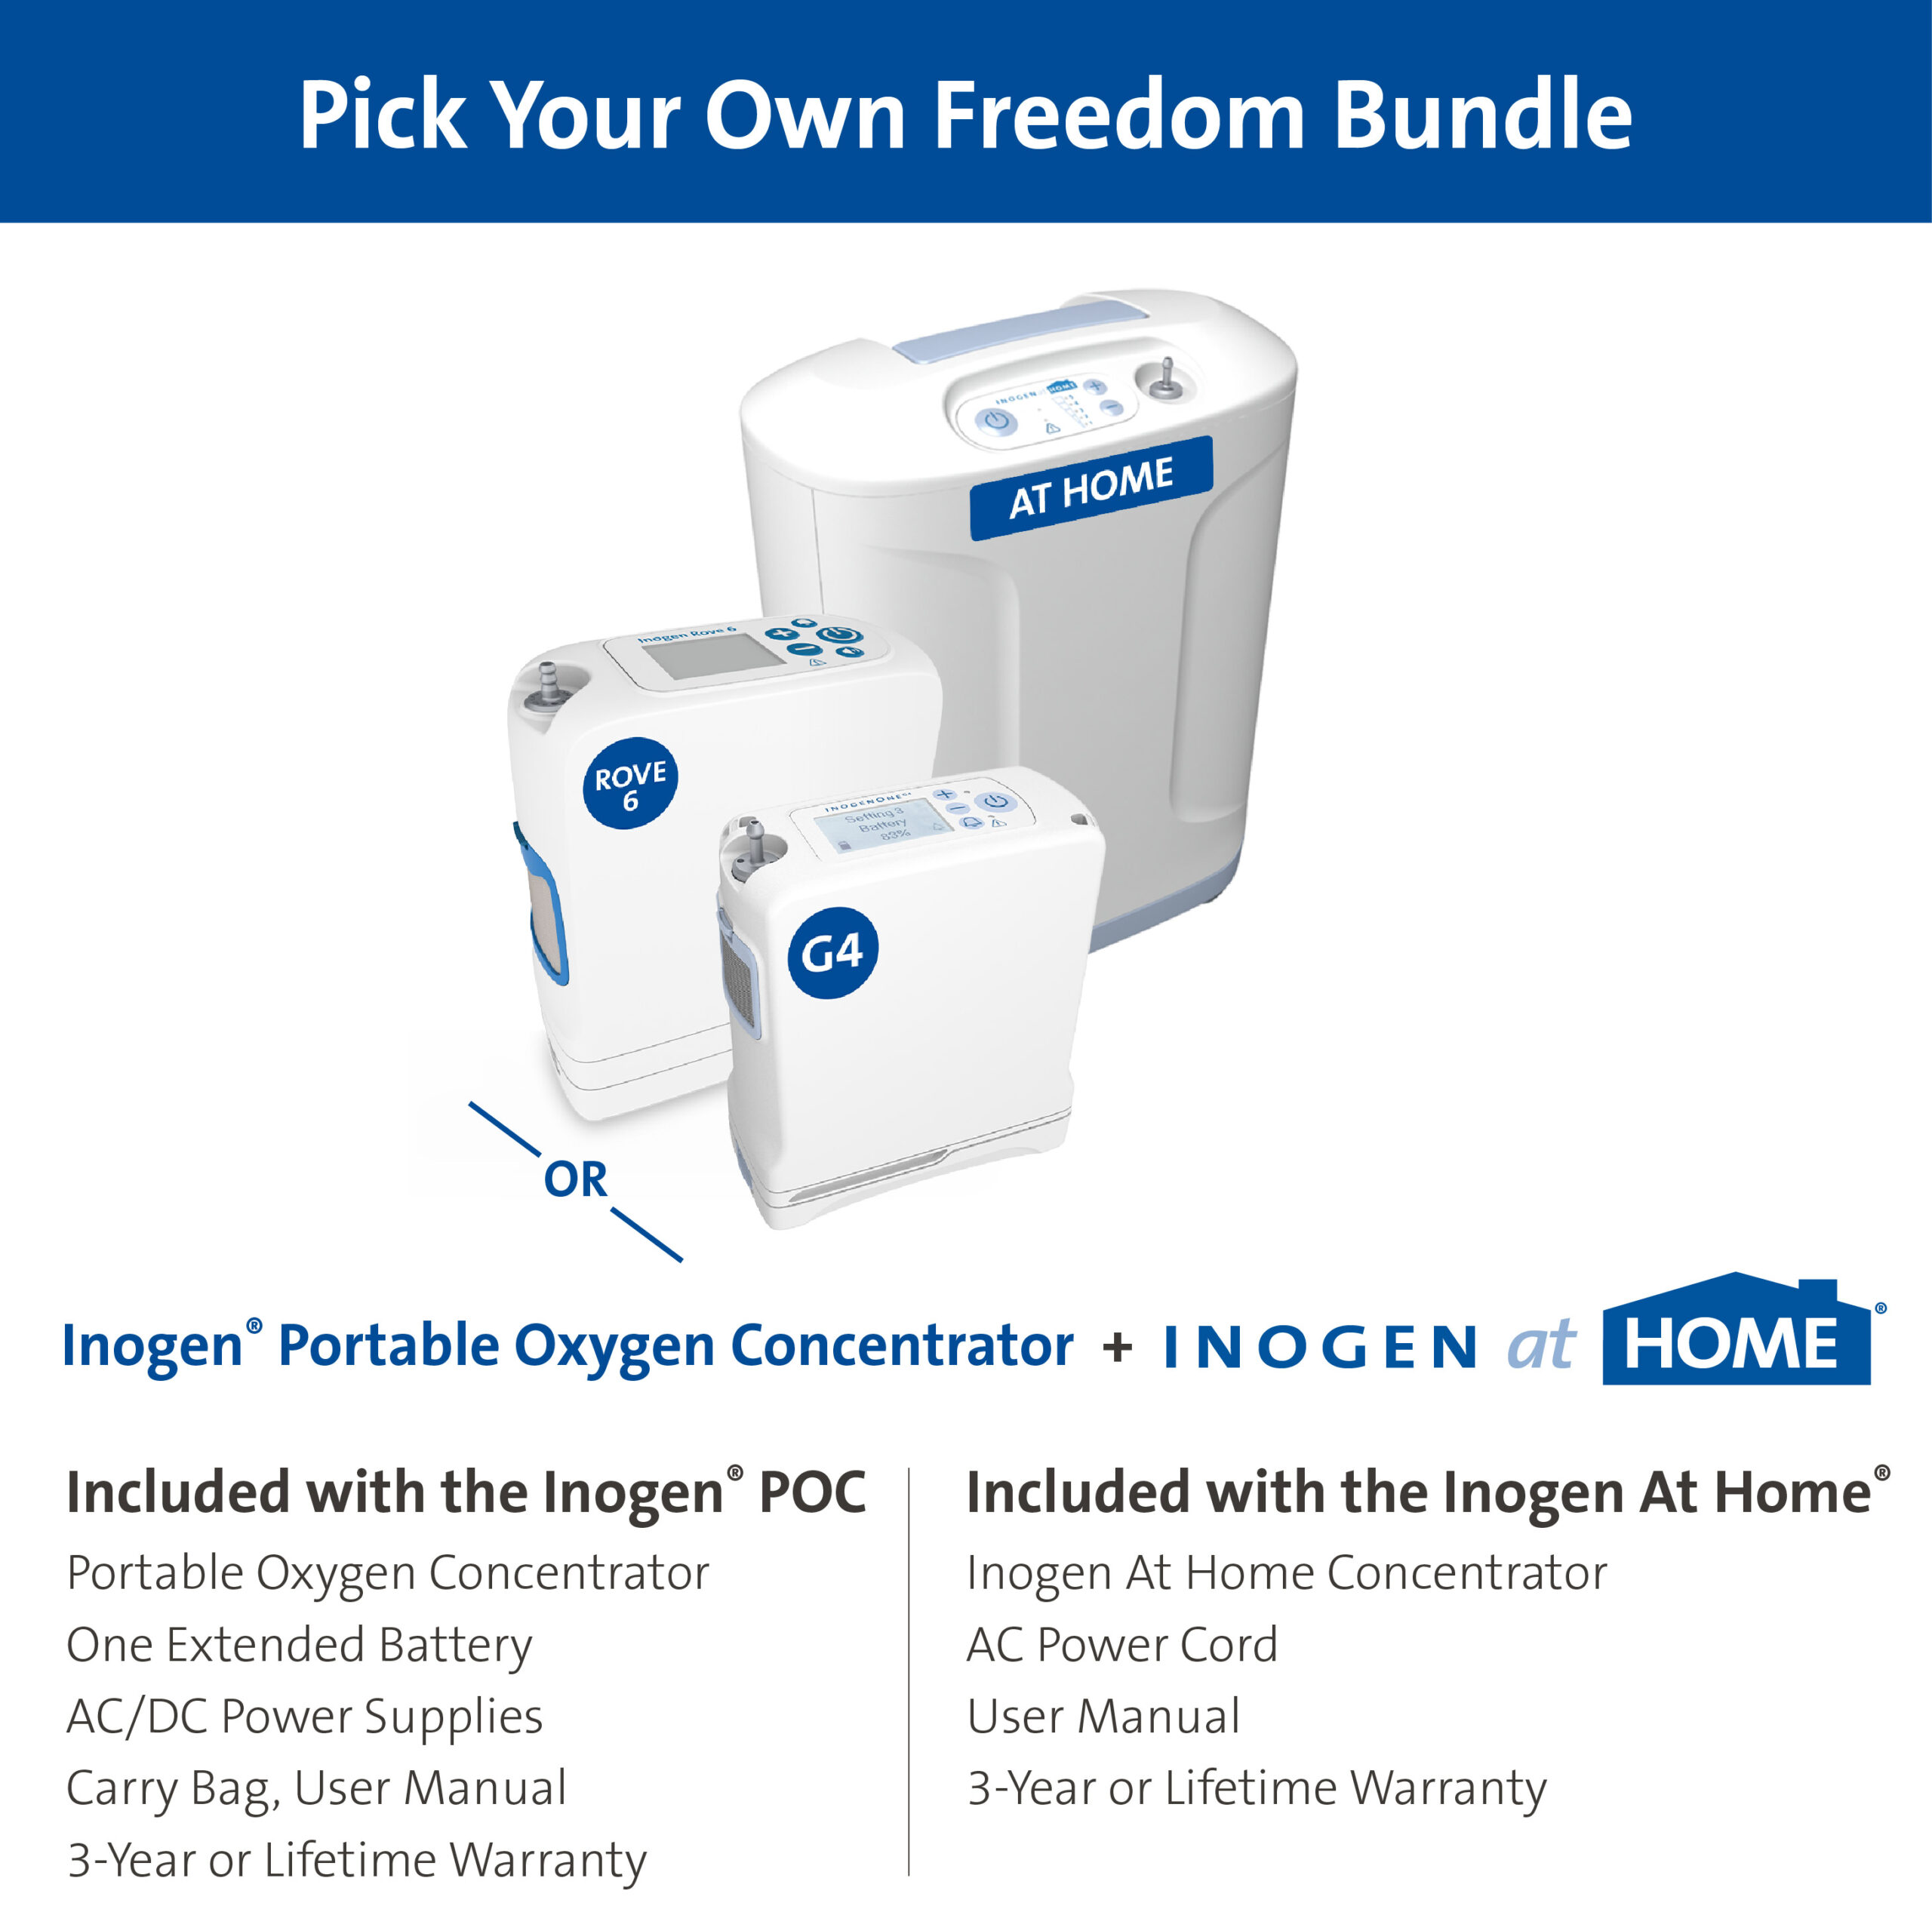 Pick your own freedom bundle. Pair an Inogen at Home Concentrator with an Inogen One G4 or Inogen Rove 6 concentrator.